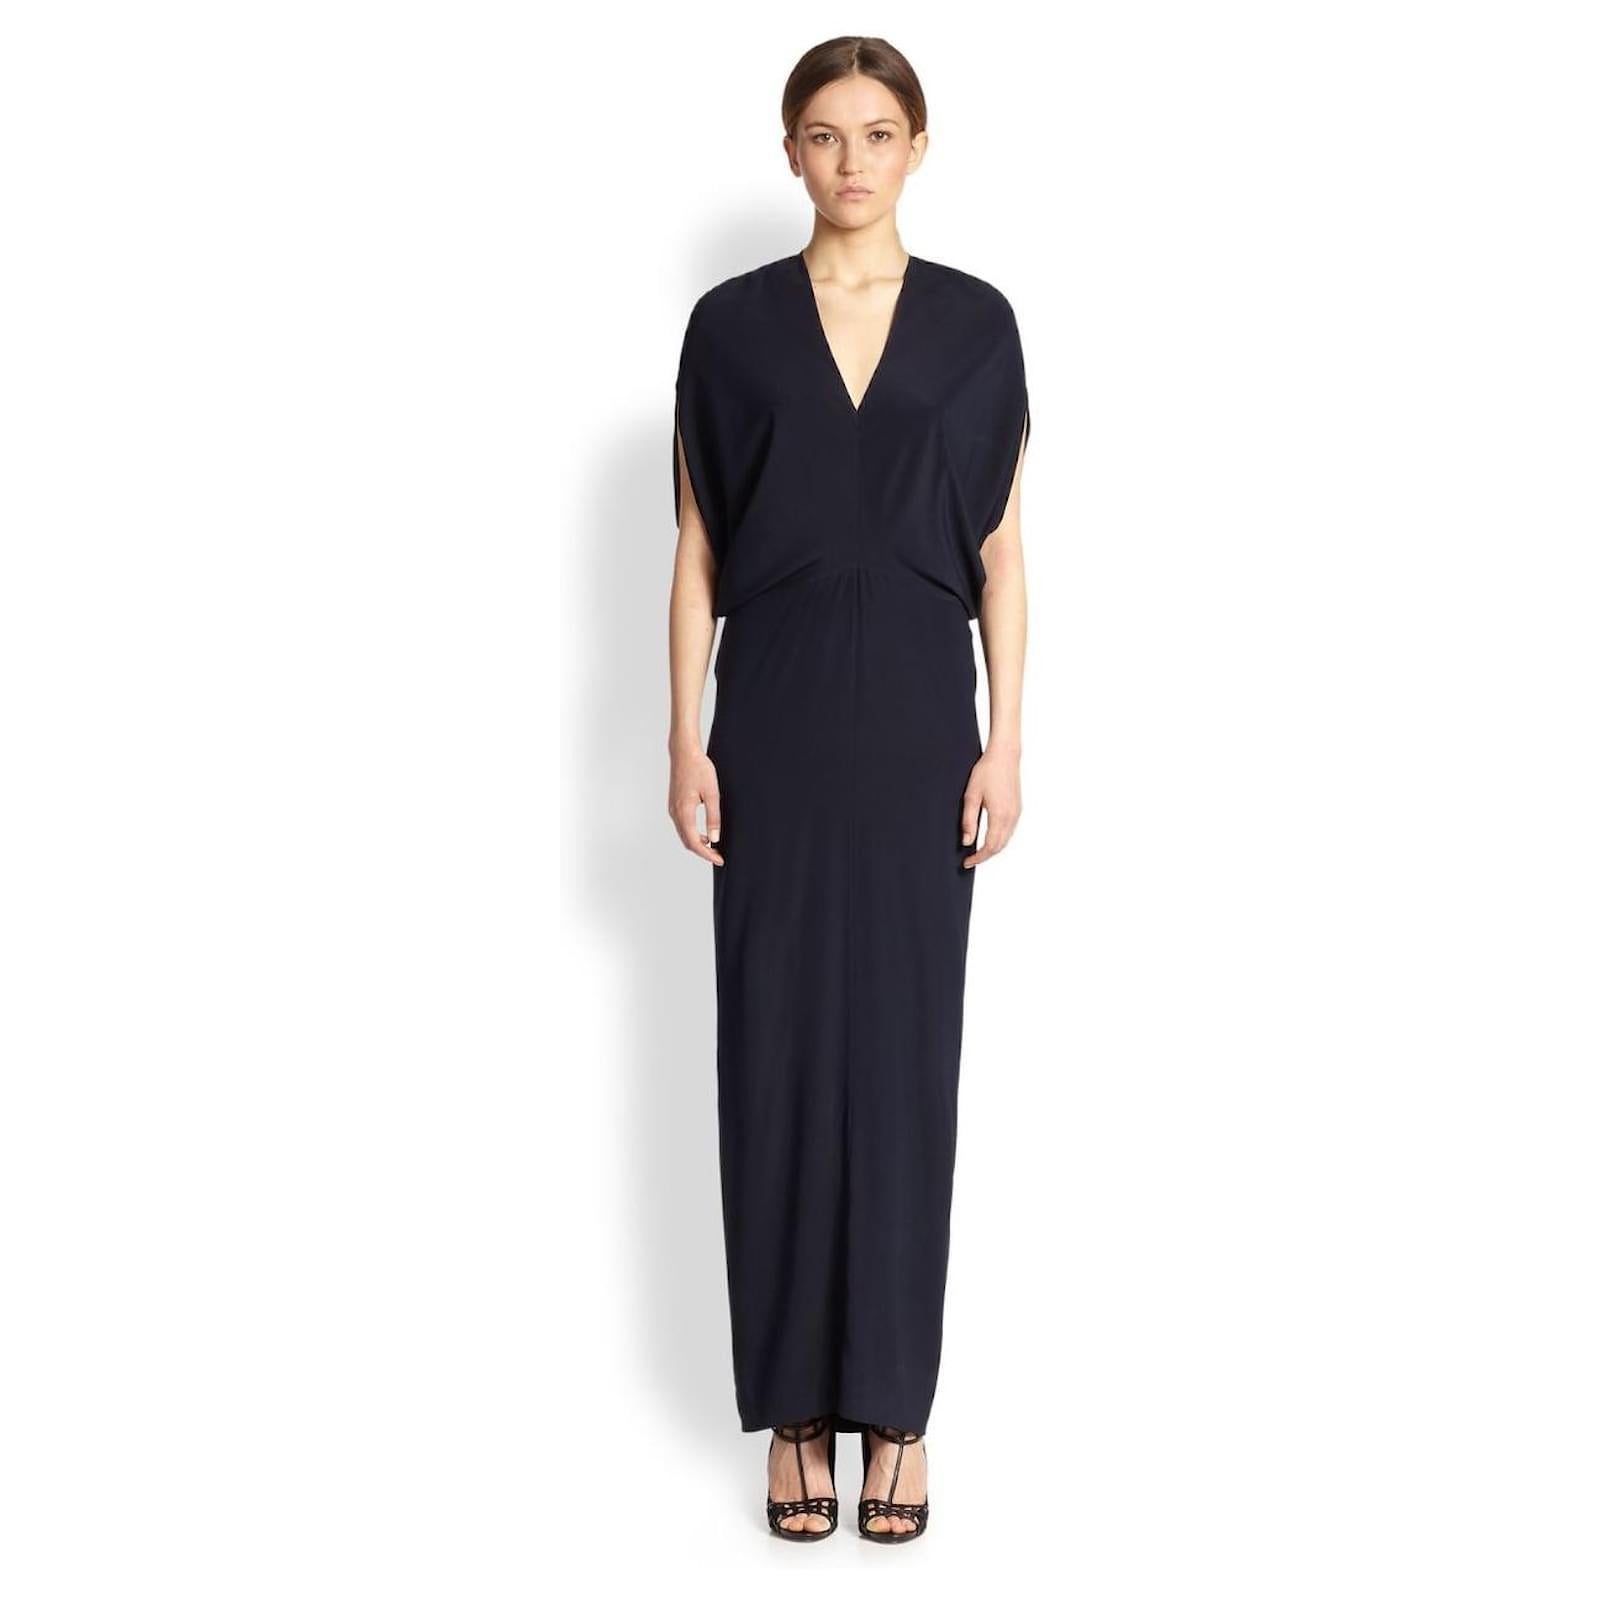 Exquisite, minimalist chic Zero+ Maria Cornejo Reni gown maxi dress - bought for £950 and worn once. 
Made from lightweight, smooth midnight blue silk with lycra, it has Cornejo’s signature precision cut with 
softly draped kimono inspired bodice